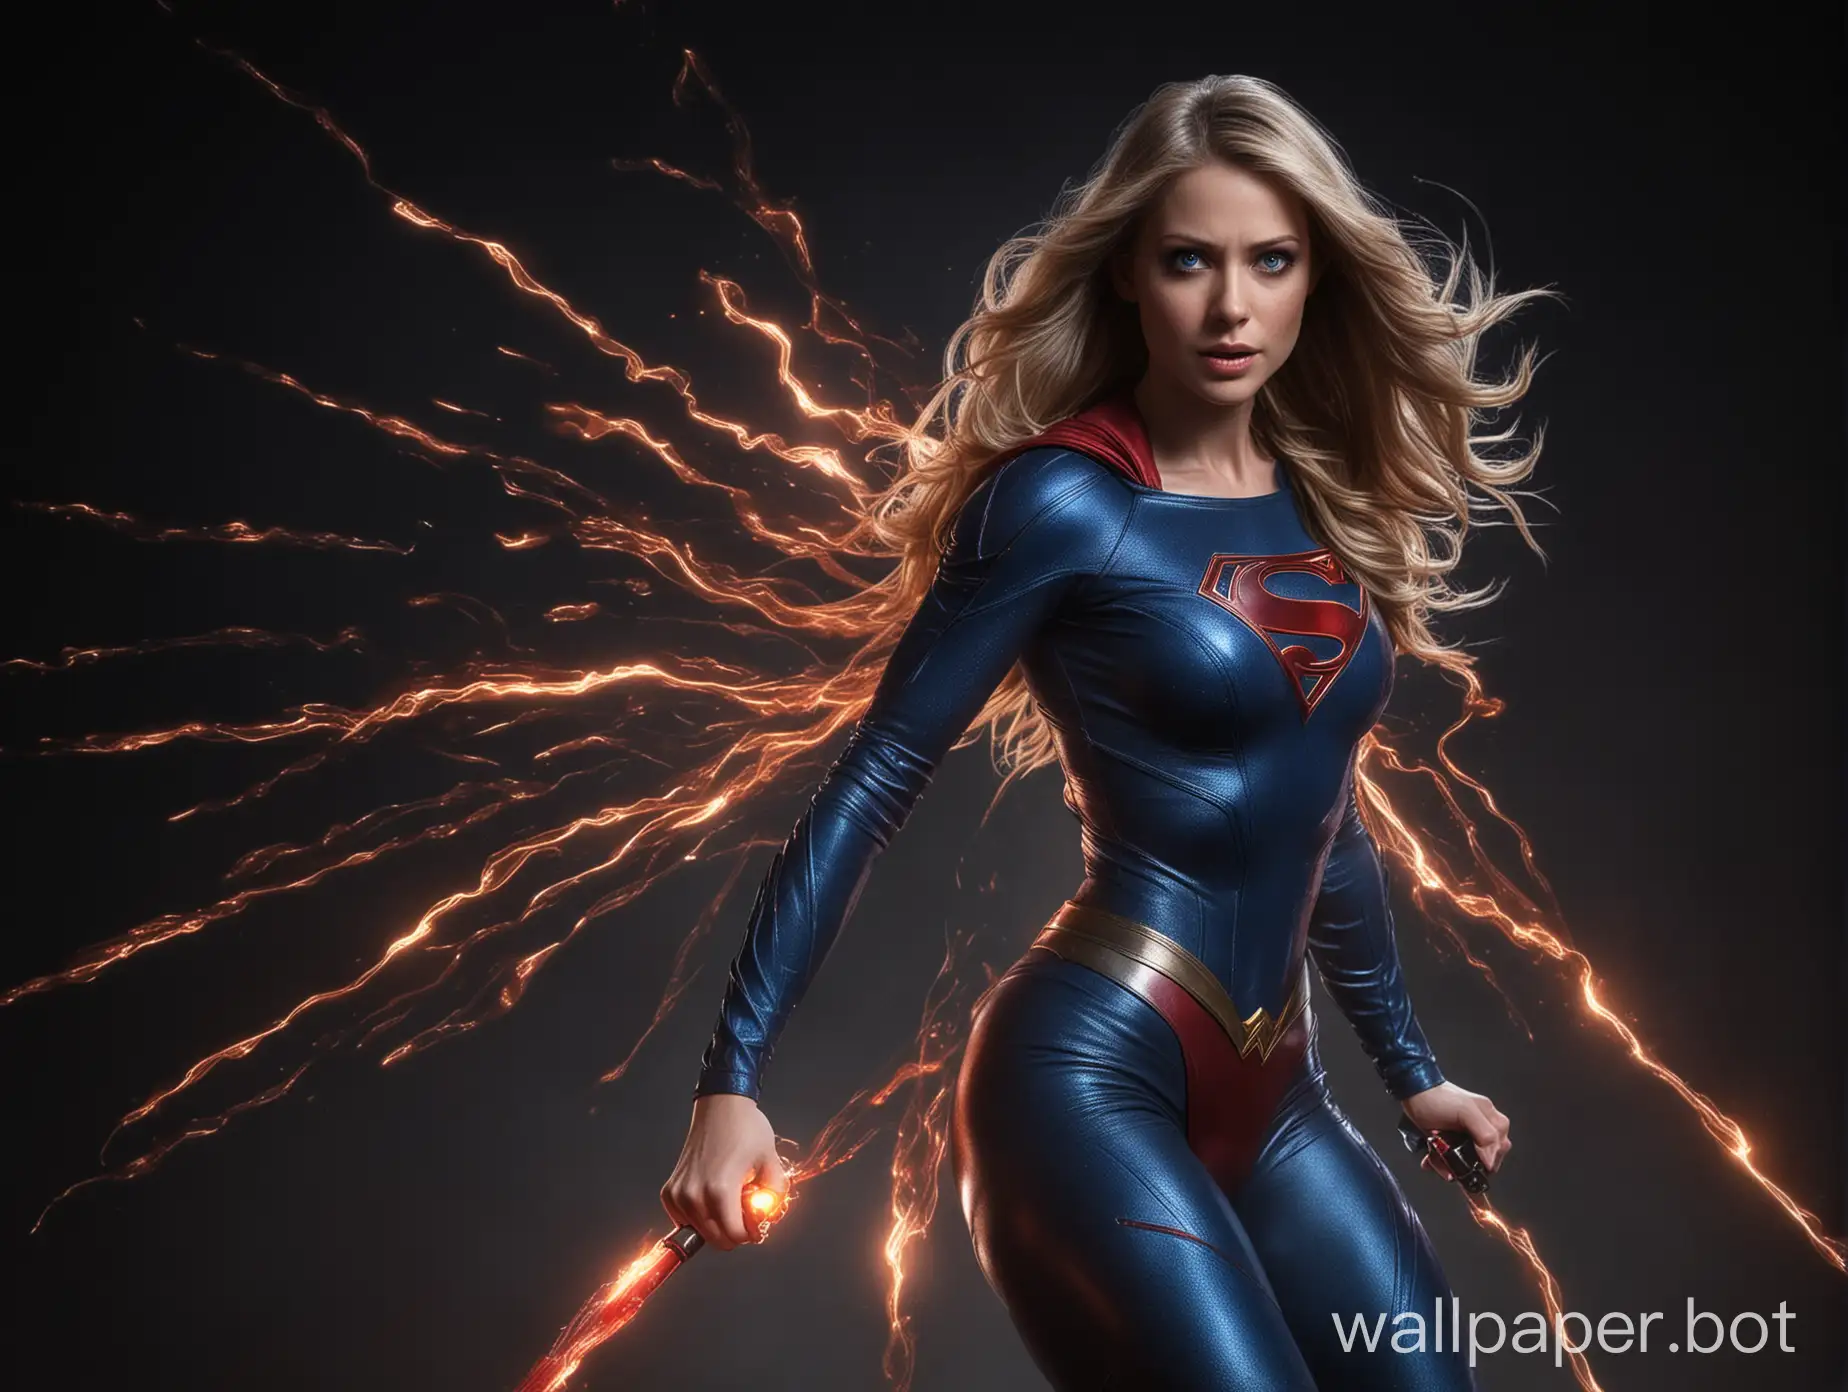 Supergirl-in-Latex-Bodysuit-Shoots-Laser-Beams-with-Fiery-Hair